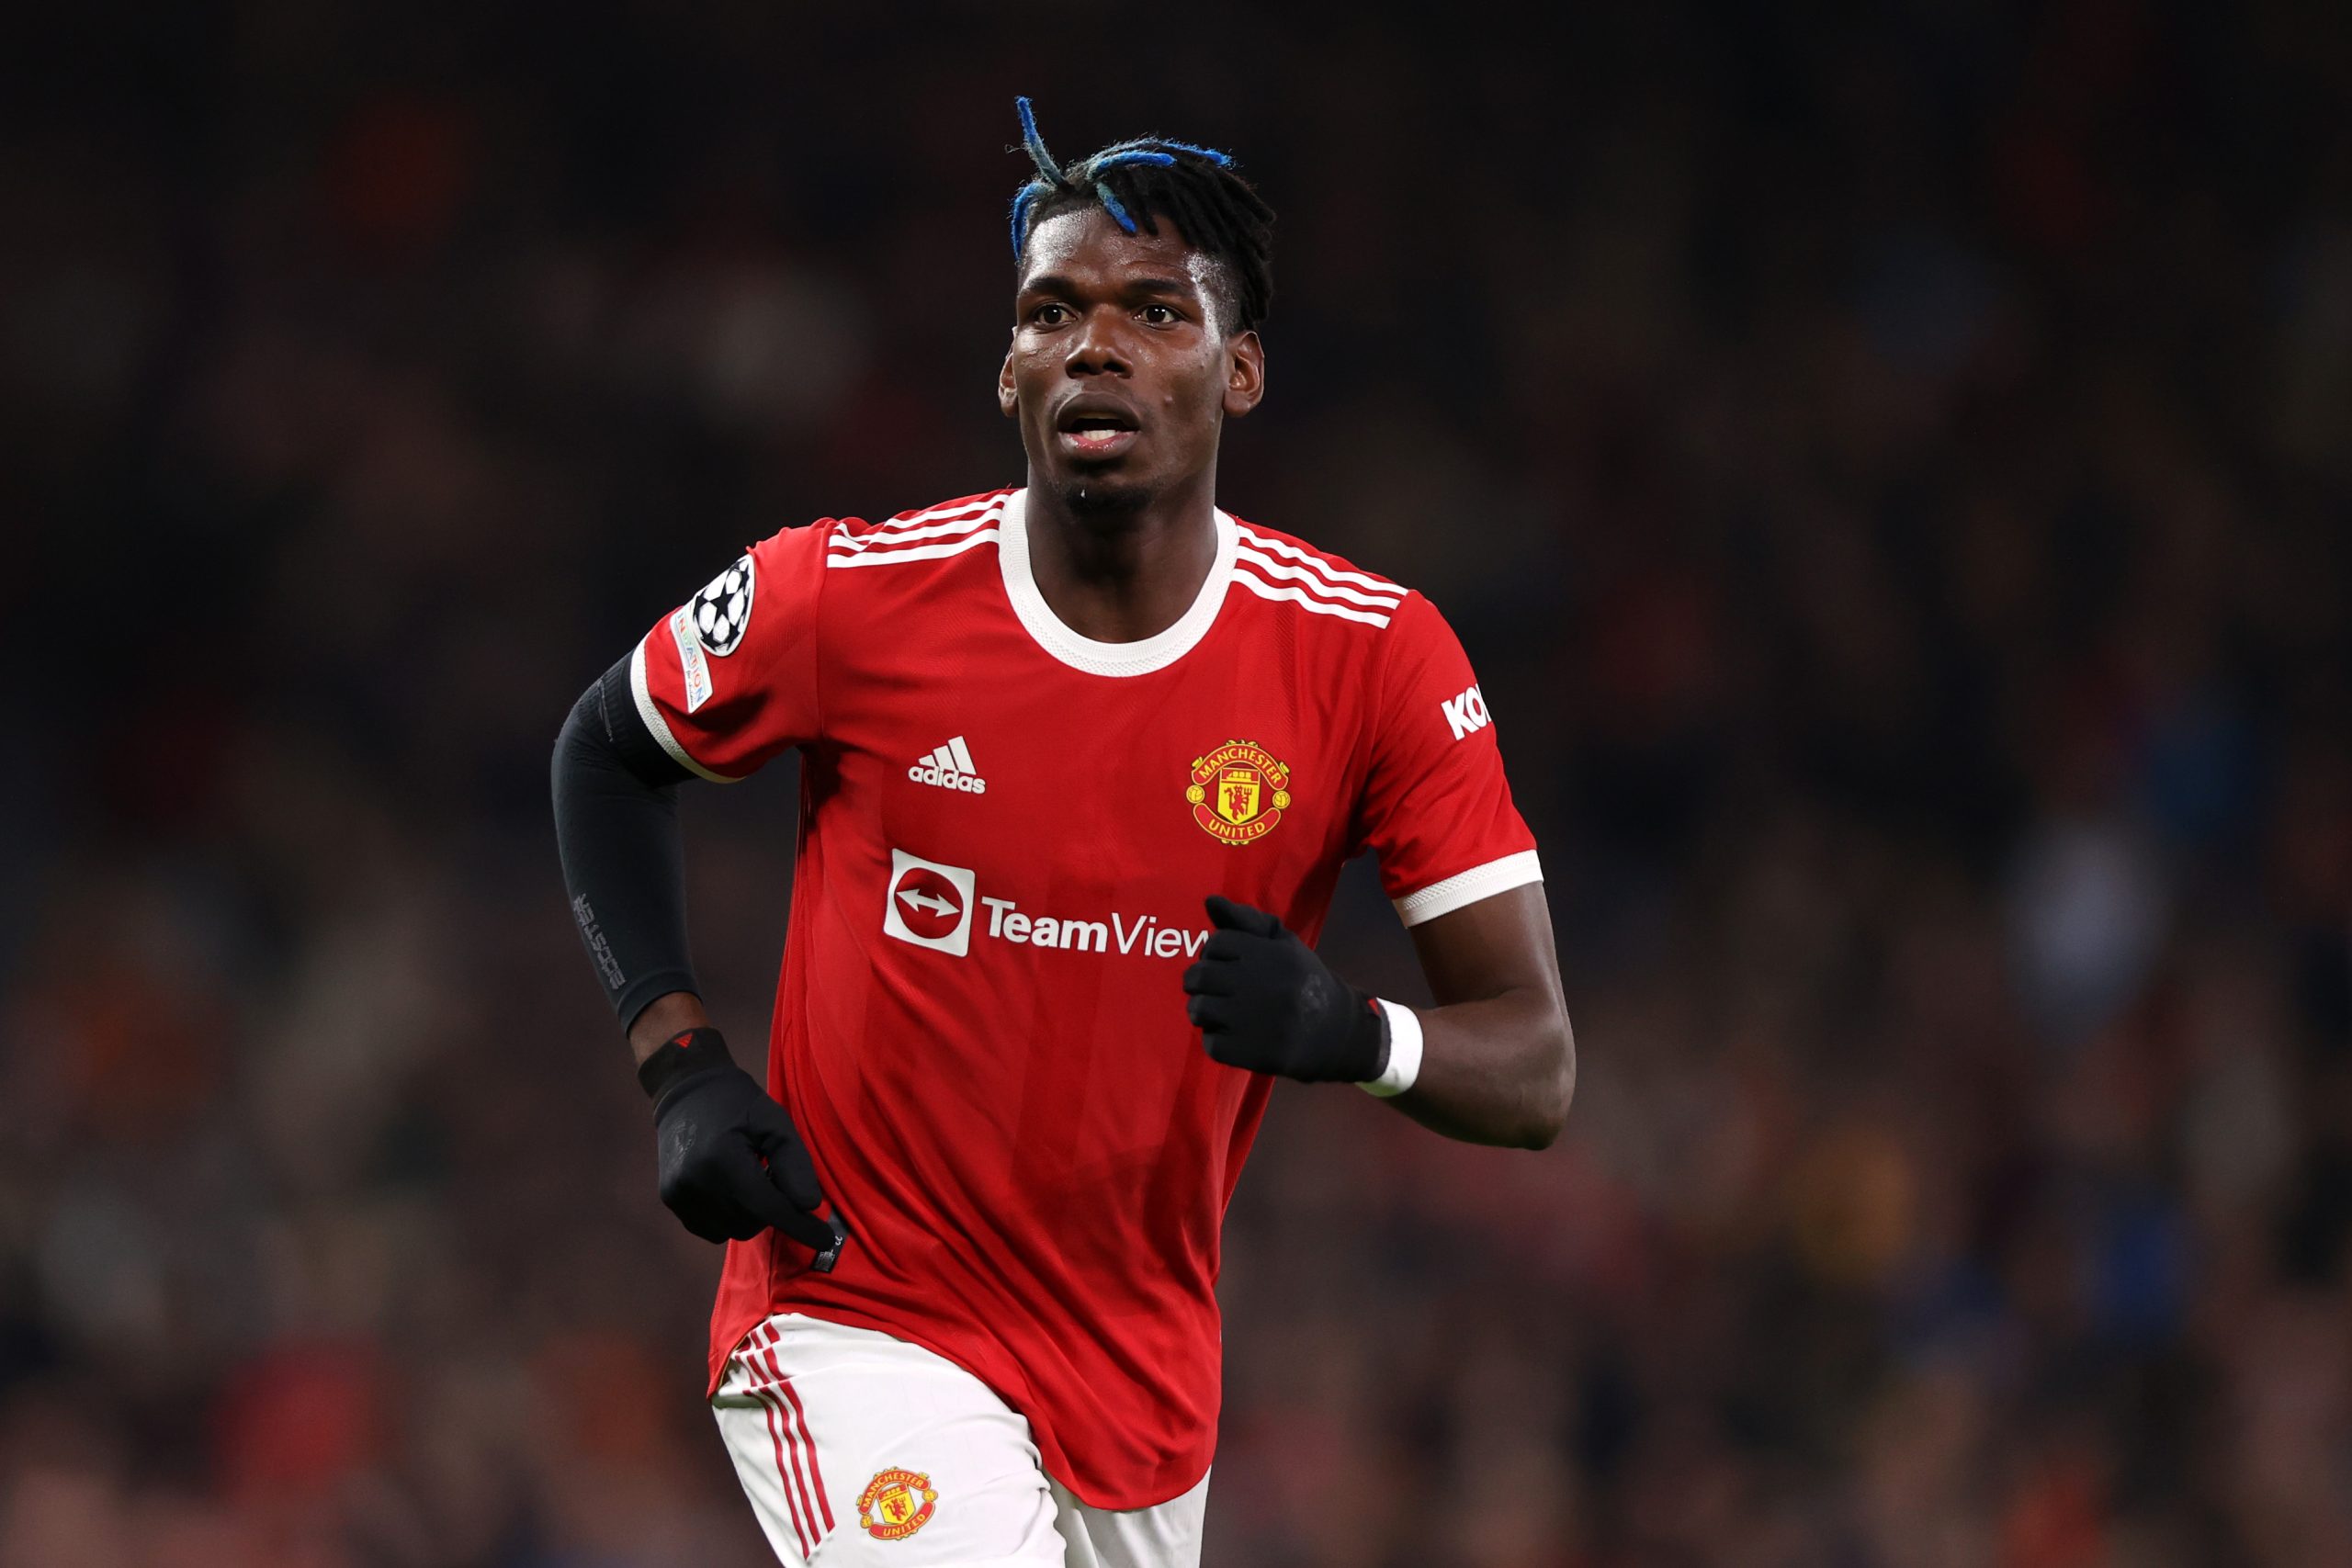 Transfer News: Juventus are set to hold transfer talks with Chelsea target Paul Pogba.